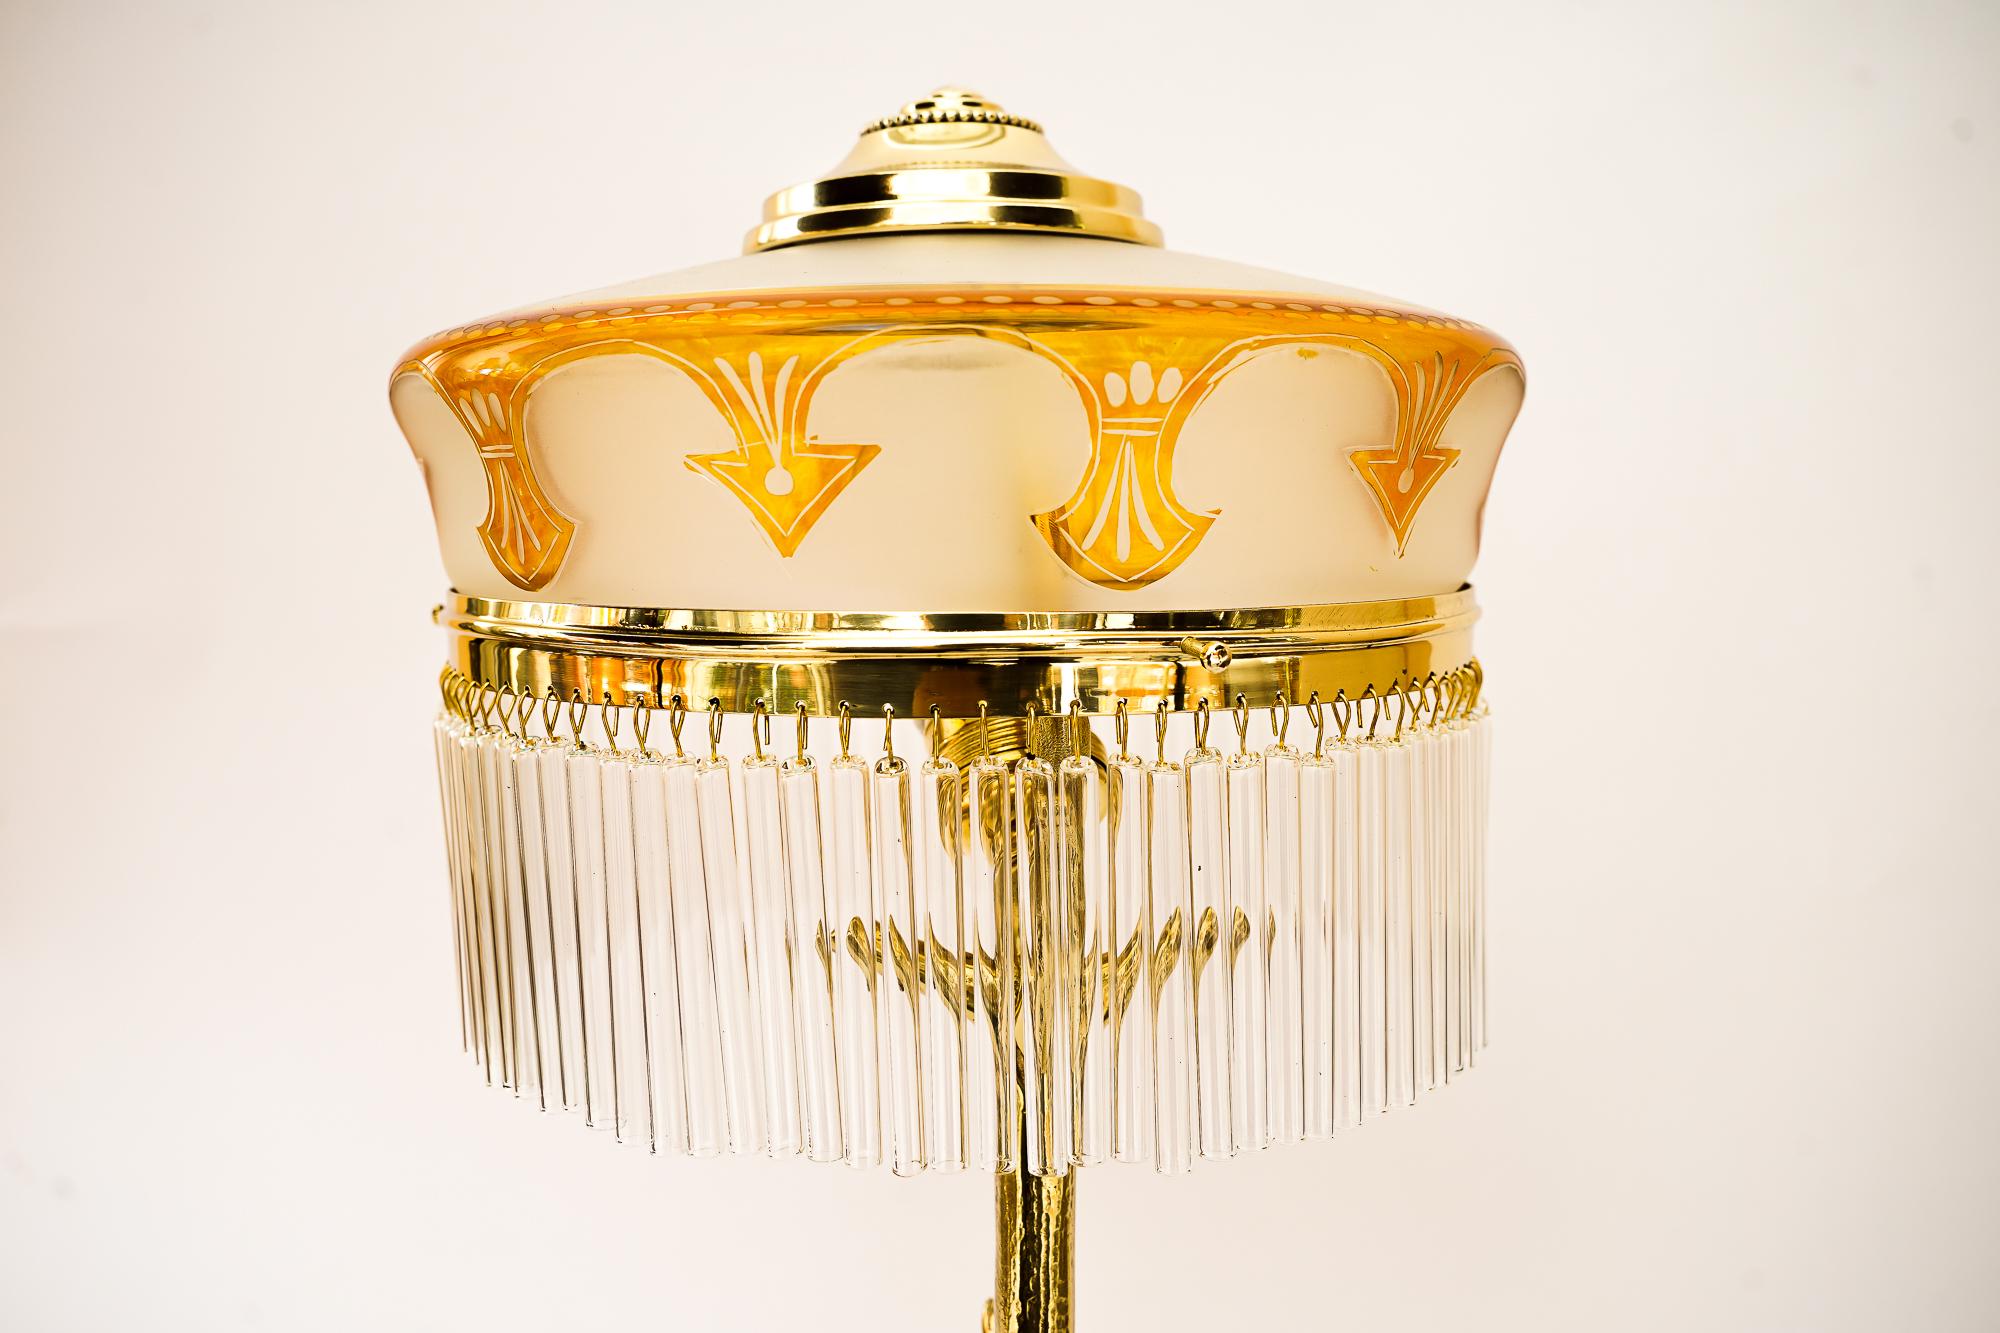 Early 20th Century Jugendstil Table Lamp with Original Antique Glass Shade, Vienna, Around 1910s For Sale